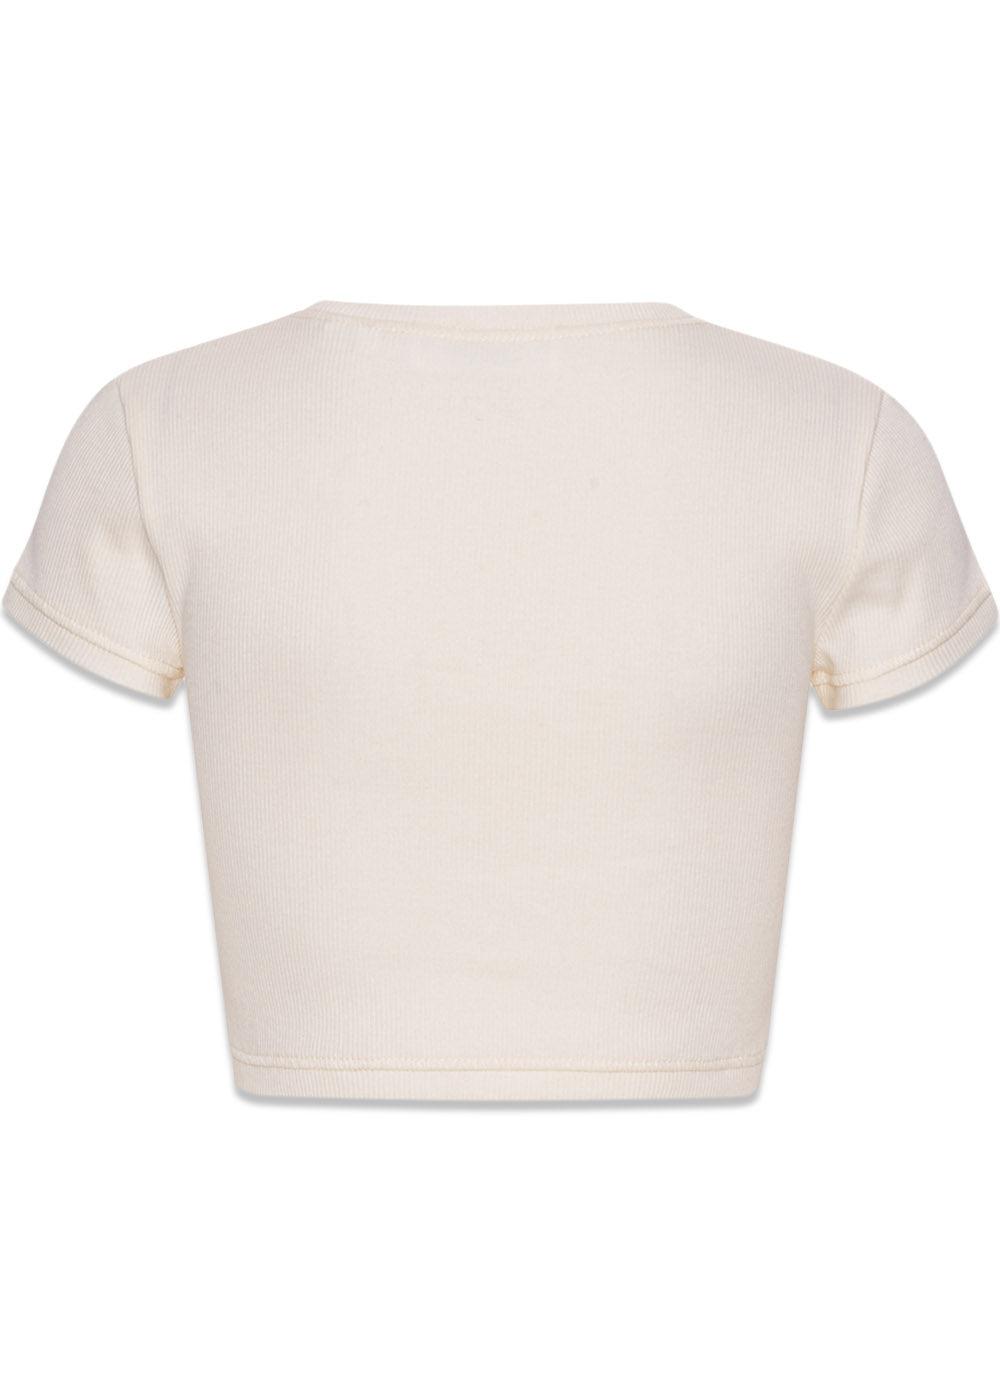 Cropped T-Shirt - Bright White